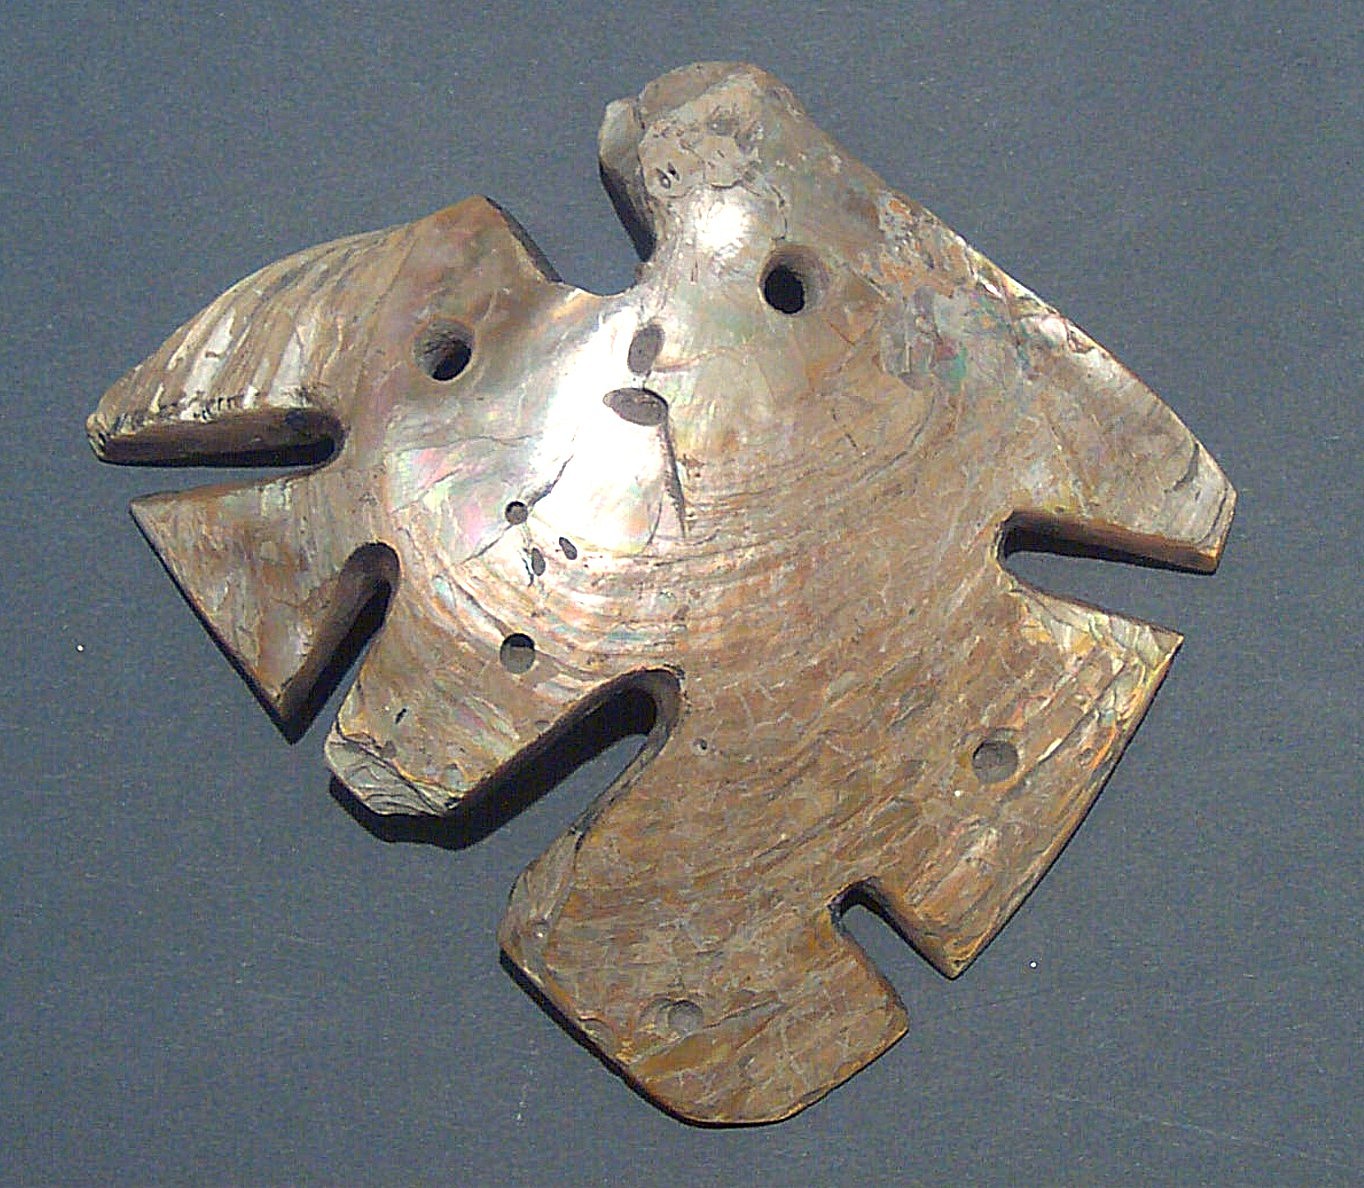 Ecuador, Mother of Pearl Fish Ornament
This shell was carved to represent a highly abstracted fish.  Drill holes indicate that it was worn as a pendant.  Ancient Ecuadorean coastal societies often depicted local fauna, both naturalistically and as abstract shapes.  Shells, which grew in abundance in the warm coastal waters off Ecuador, were coveted as prestigious items throughout the Andes.  A similar example is illustrated in Francisco Valdez and Diego Veintimilla’s Amerindian Signs: 5,000 Years of Pre-Columbian Art in Ecuador (1992: fig. 63).
Media: Shell
Dimensions: Width: 4 1/4" x Height: 3 3/4"
&bull;SOLD
94302b